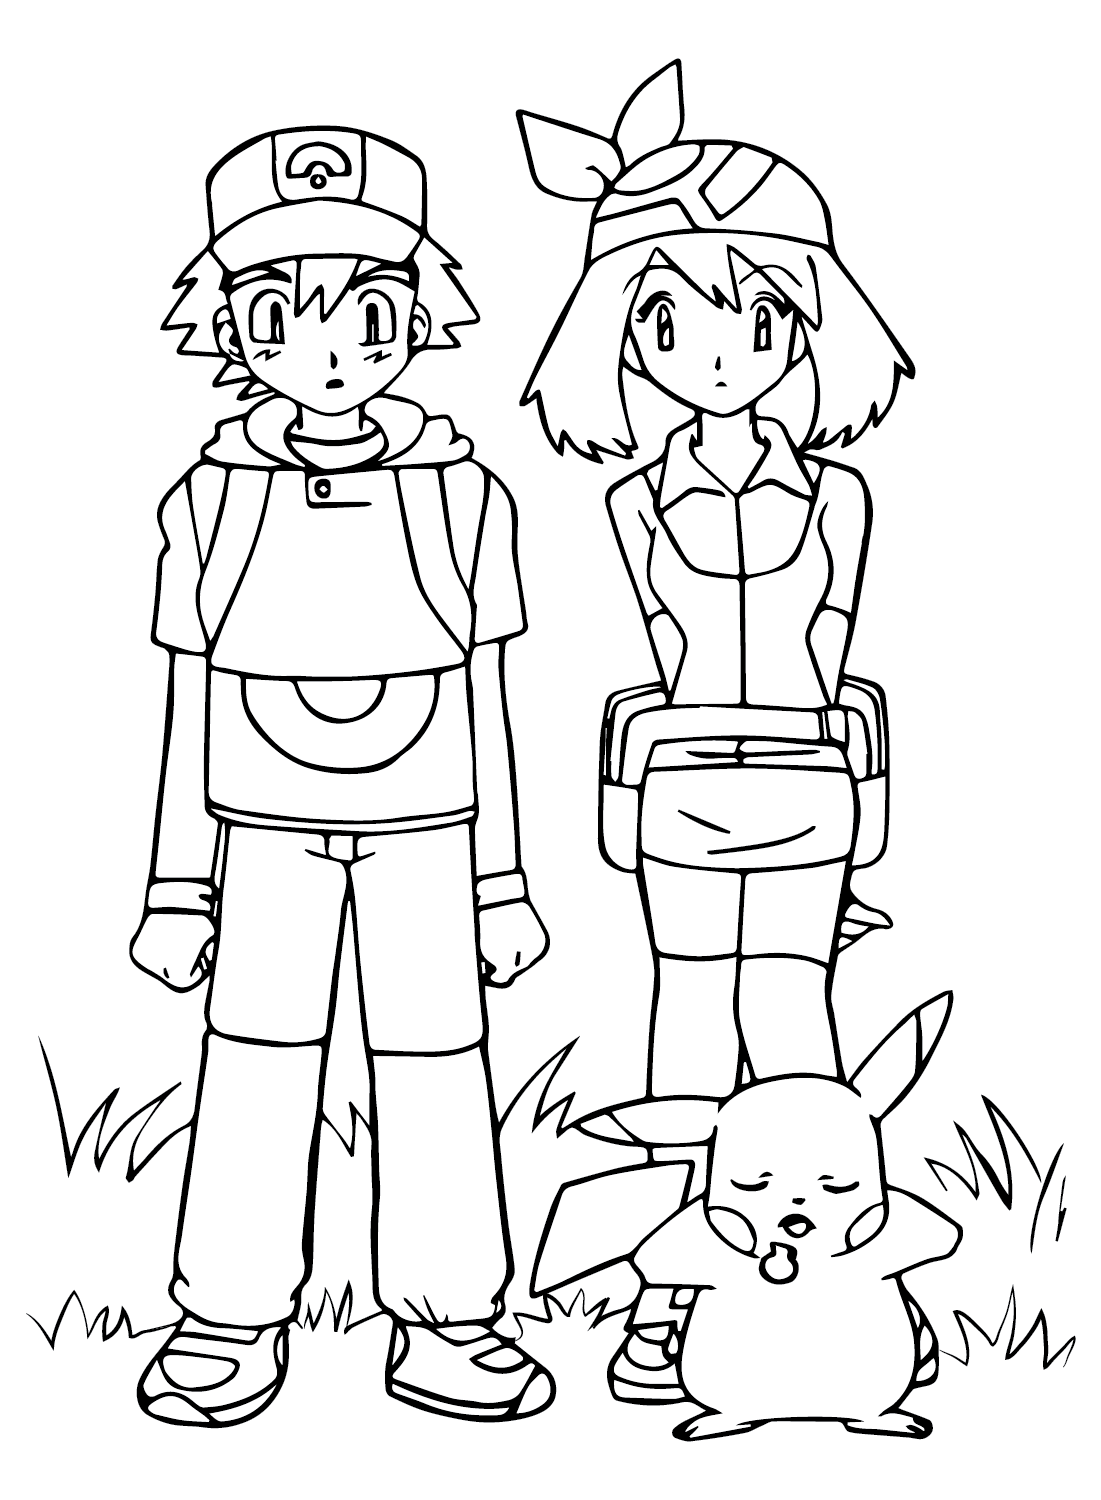 Ash with May Coloring Page Free from May Pokemon